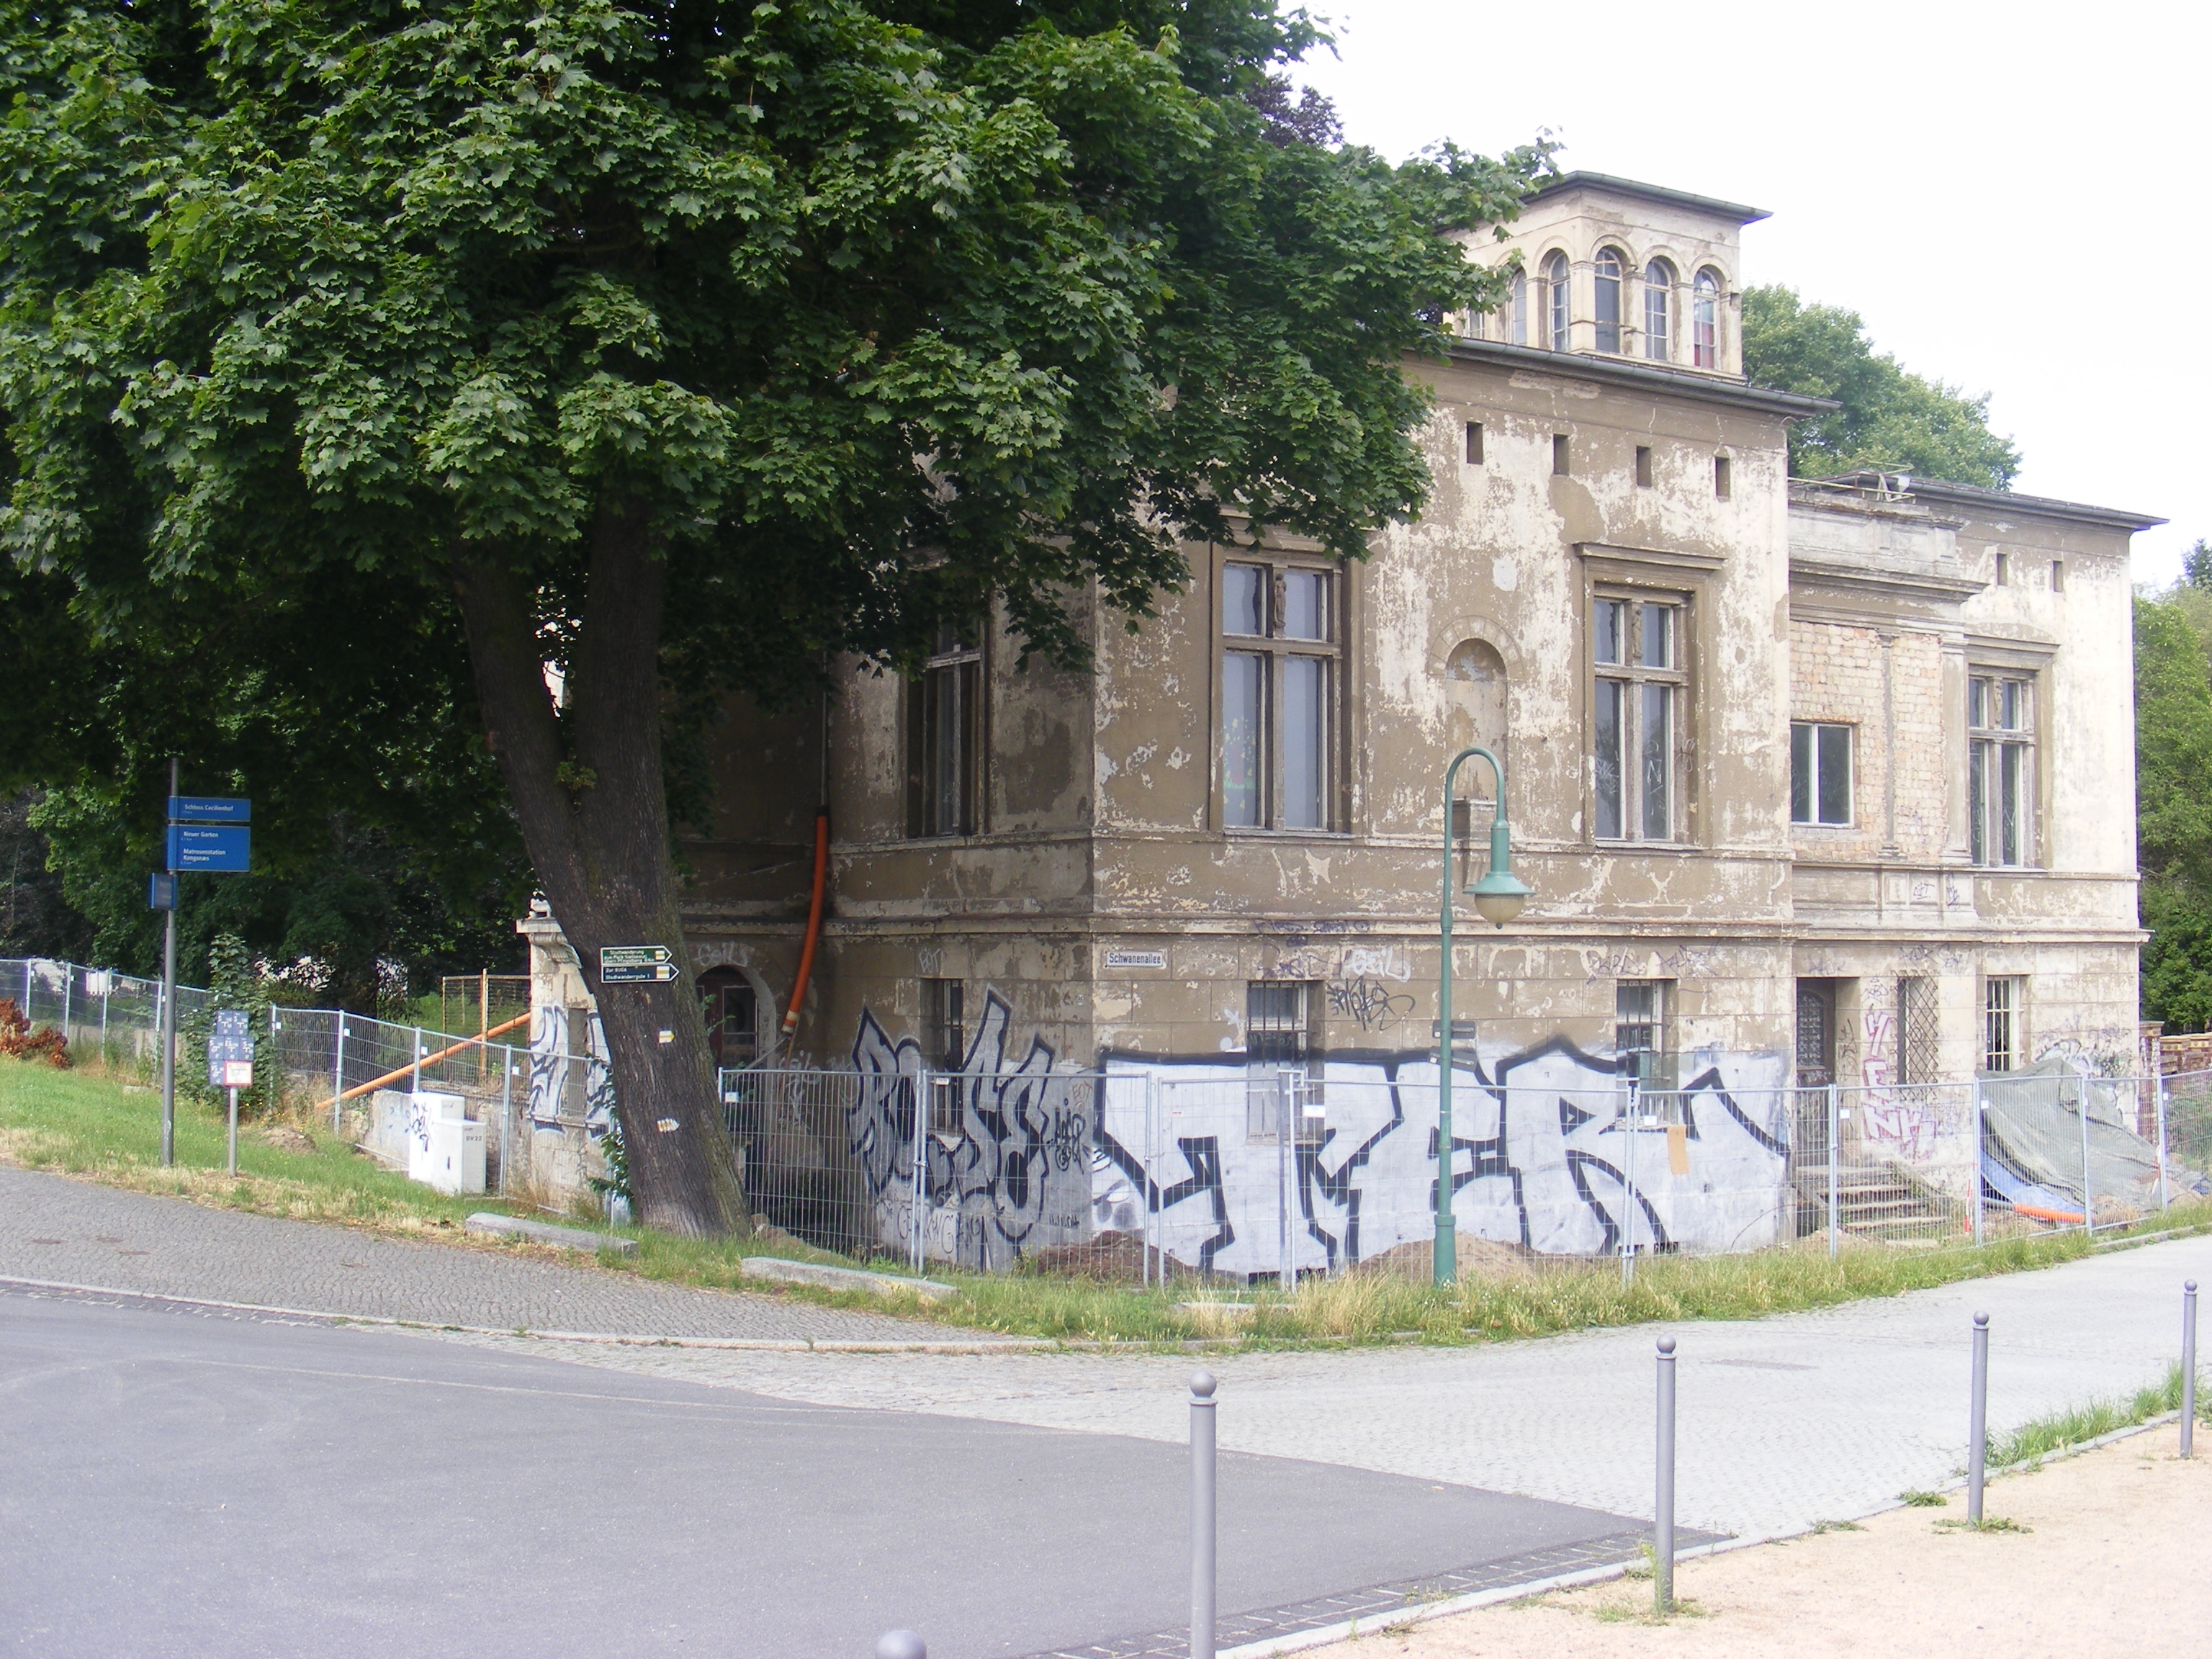 Dilapidated building in East Berlin 39 years after the opening of the Wall